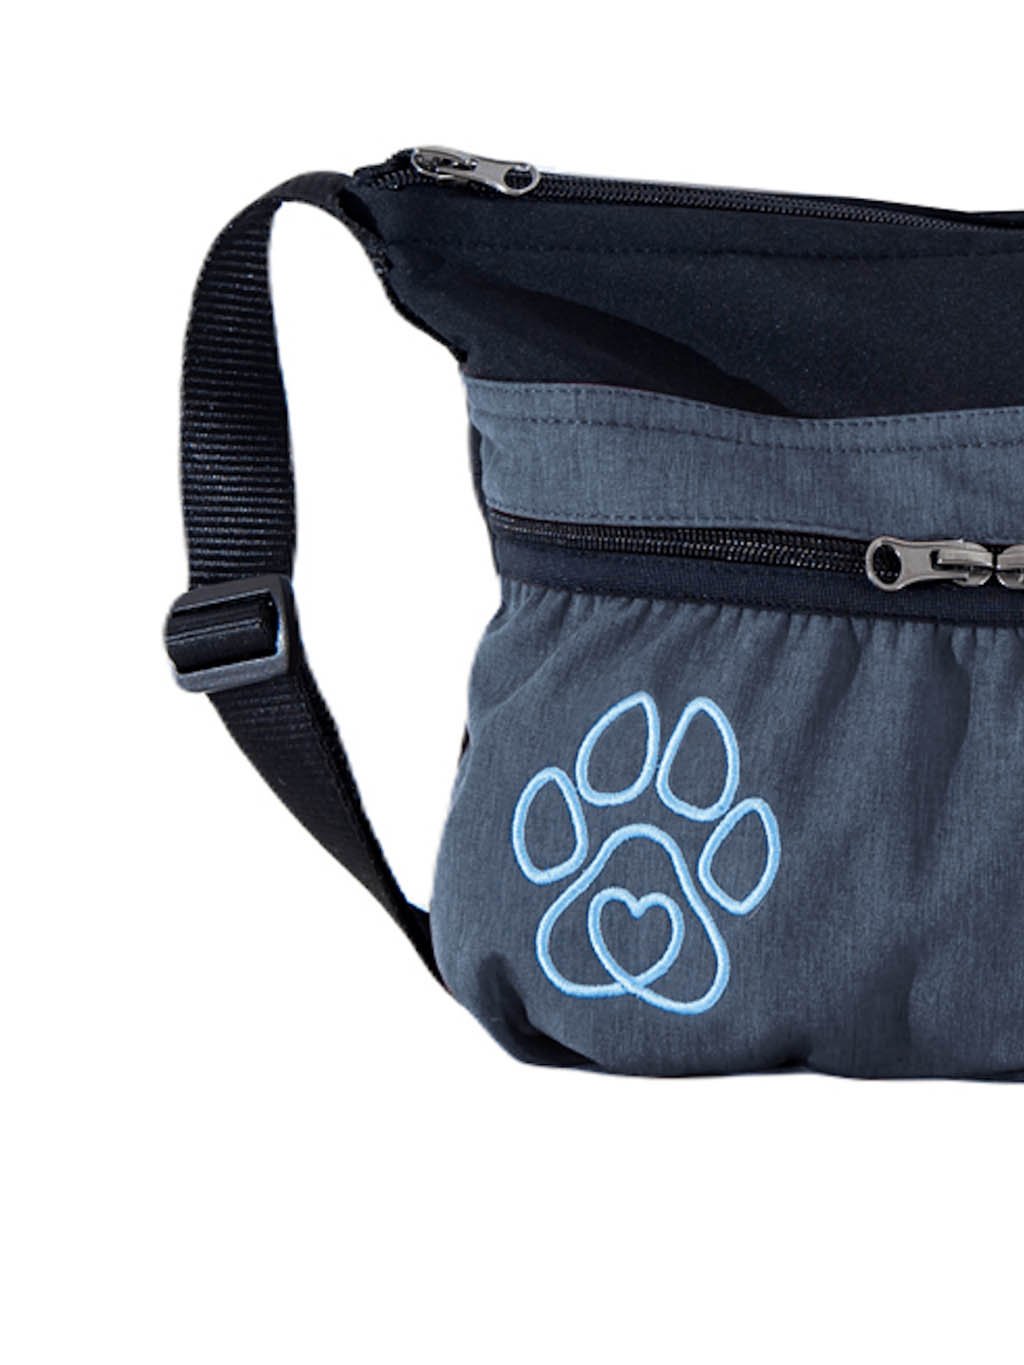 Training bag small ANTRACITE with paw 4dox